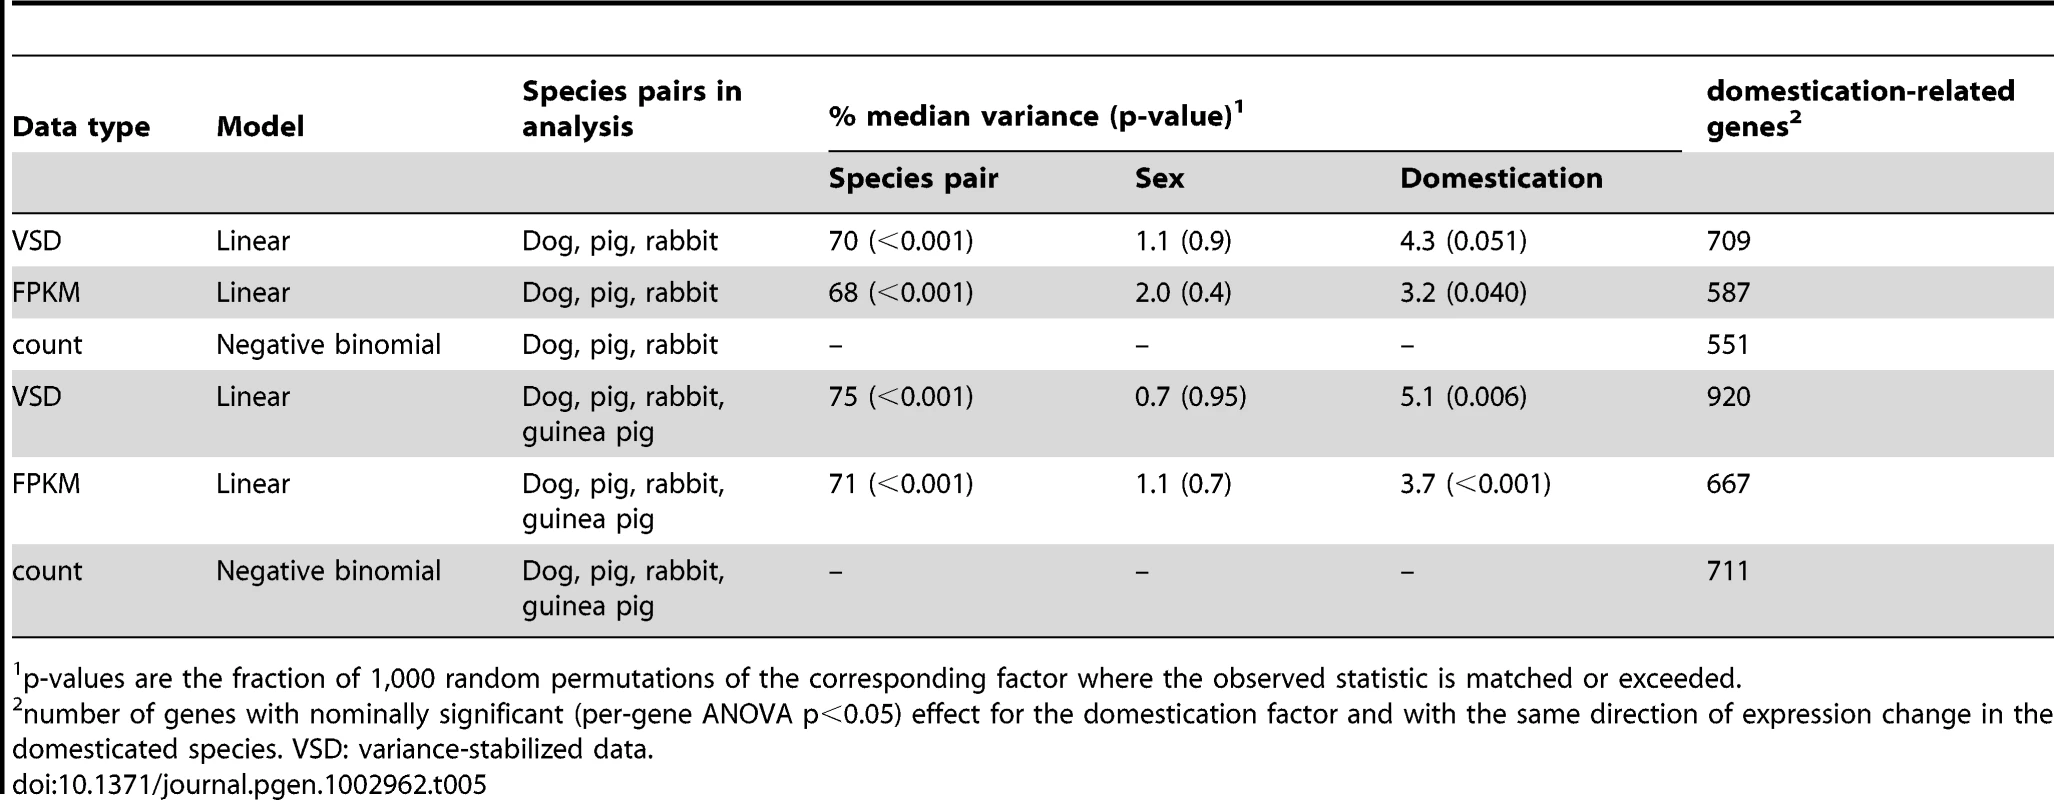 Gene expression across domesticated animals.